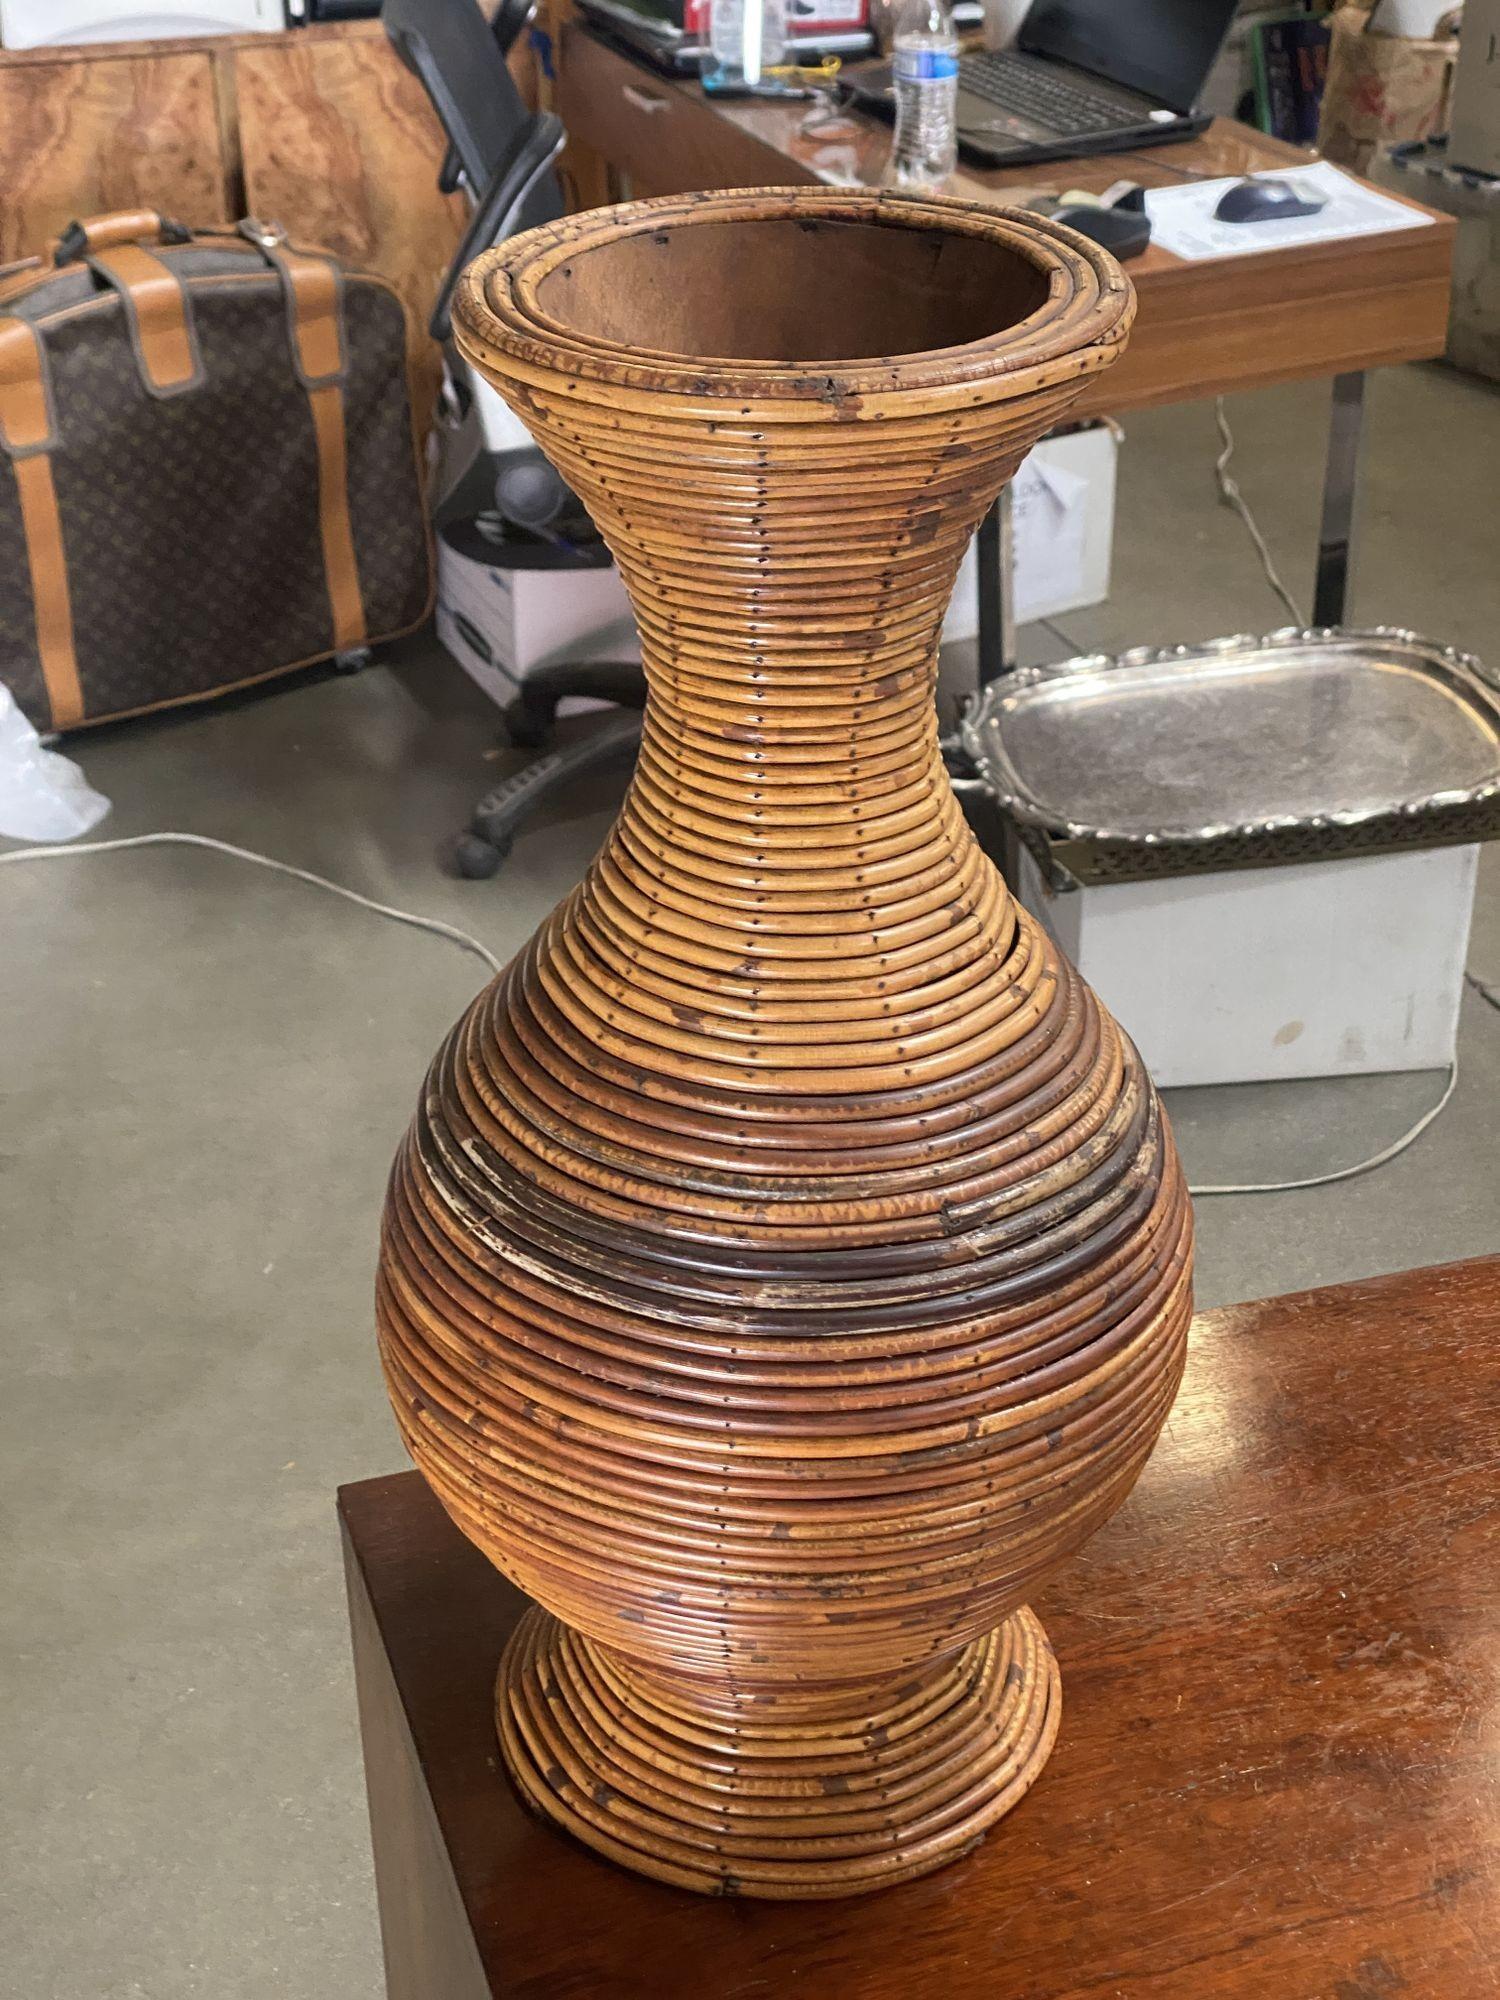 timeless chic with a boho flair. A substantial vase is perfect for holding dried arrangements or simply standing on its own.
 
Measurements are approximately 27